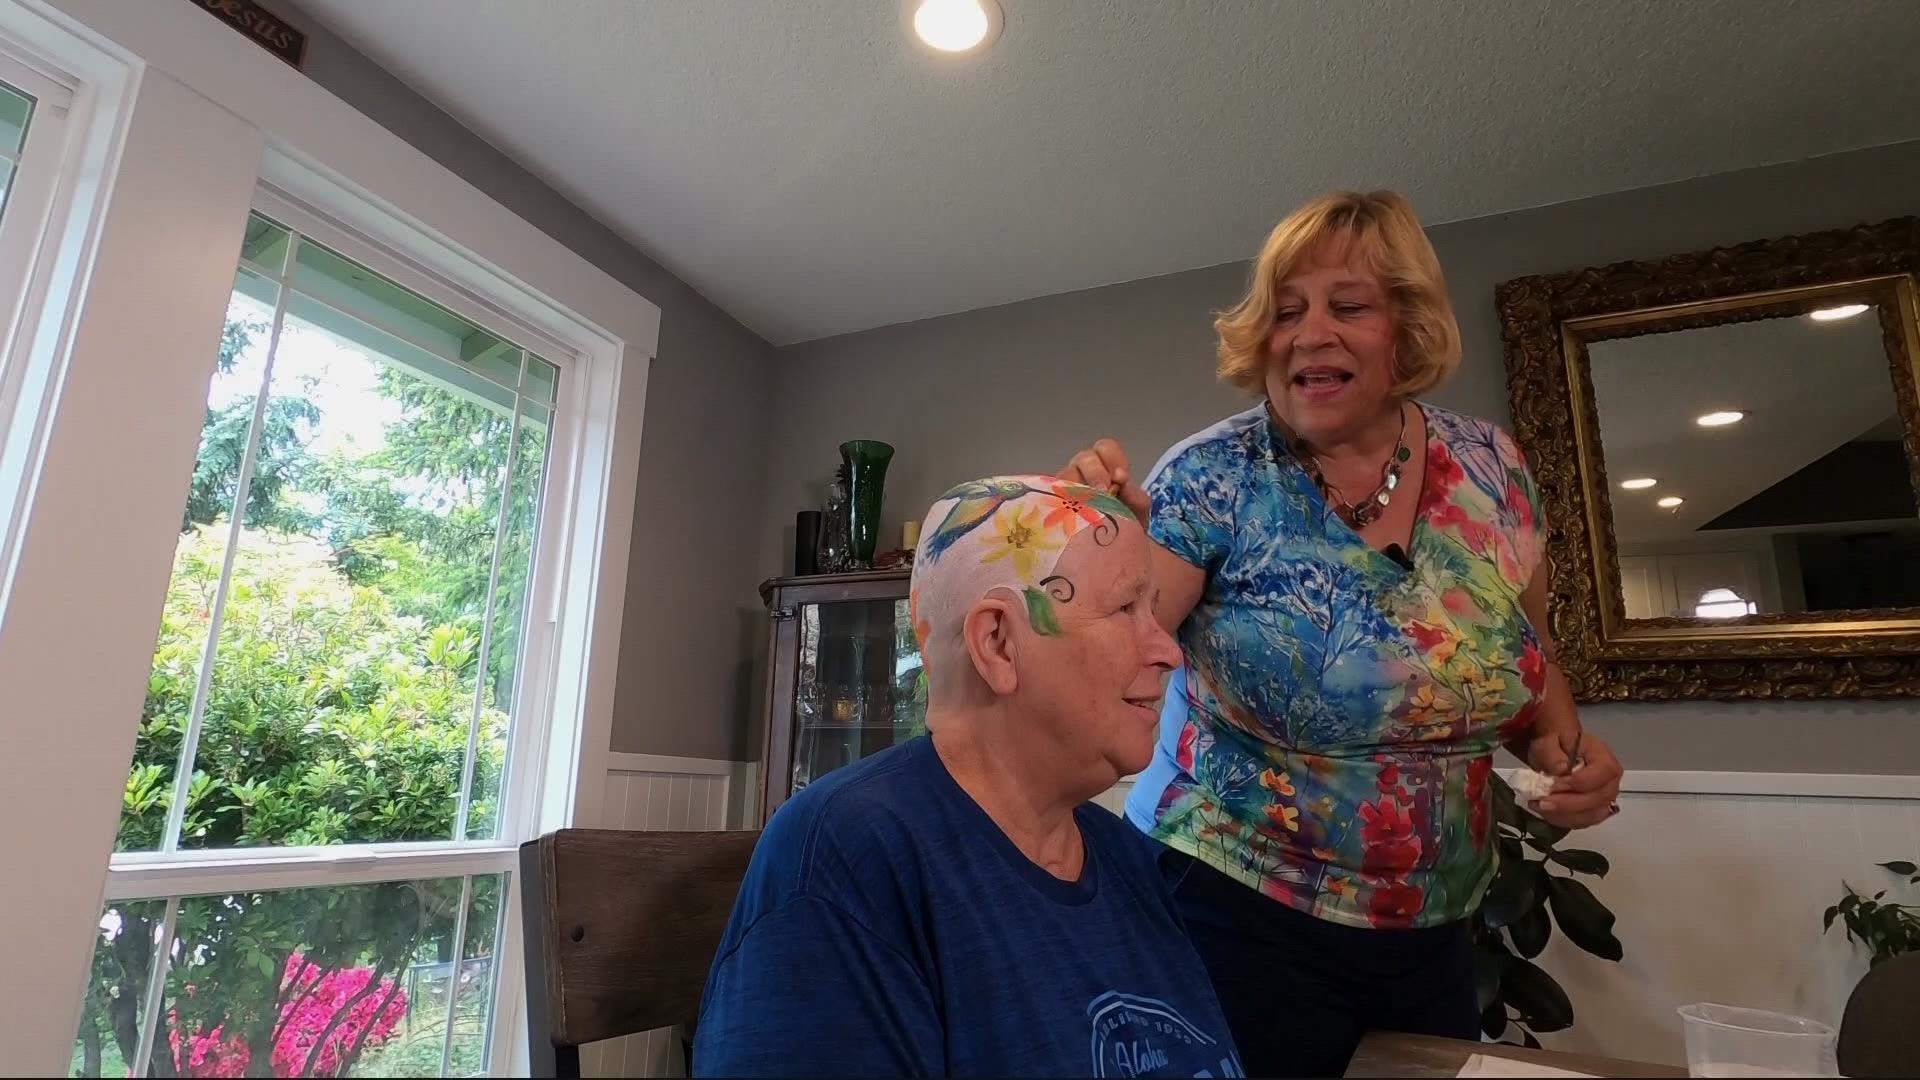 Artist Bev Ecker found a creative way to support her friend, Ava Smith, who shaved her head after being diagnosed with multiple myeloma. KGW's Jon Goodwin explains.